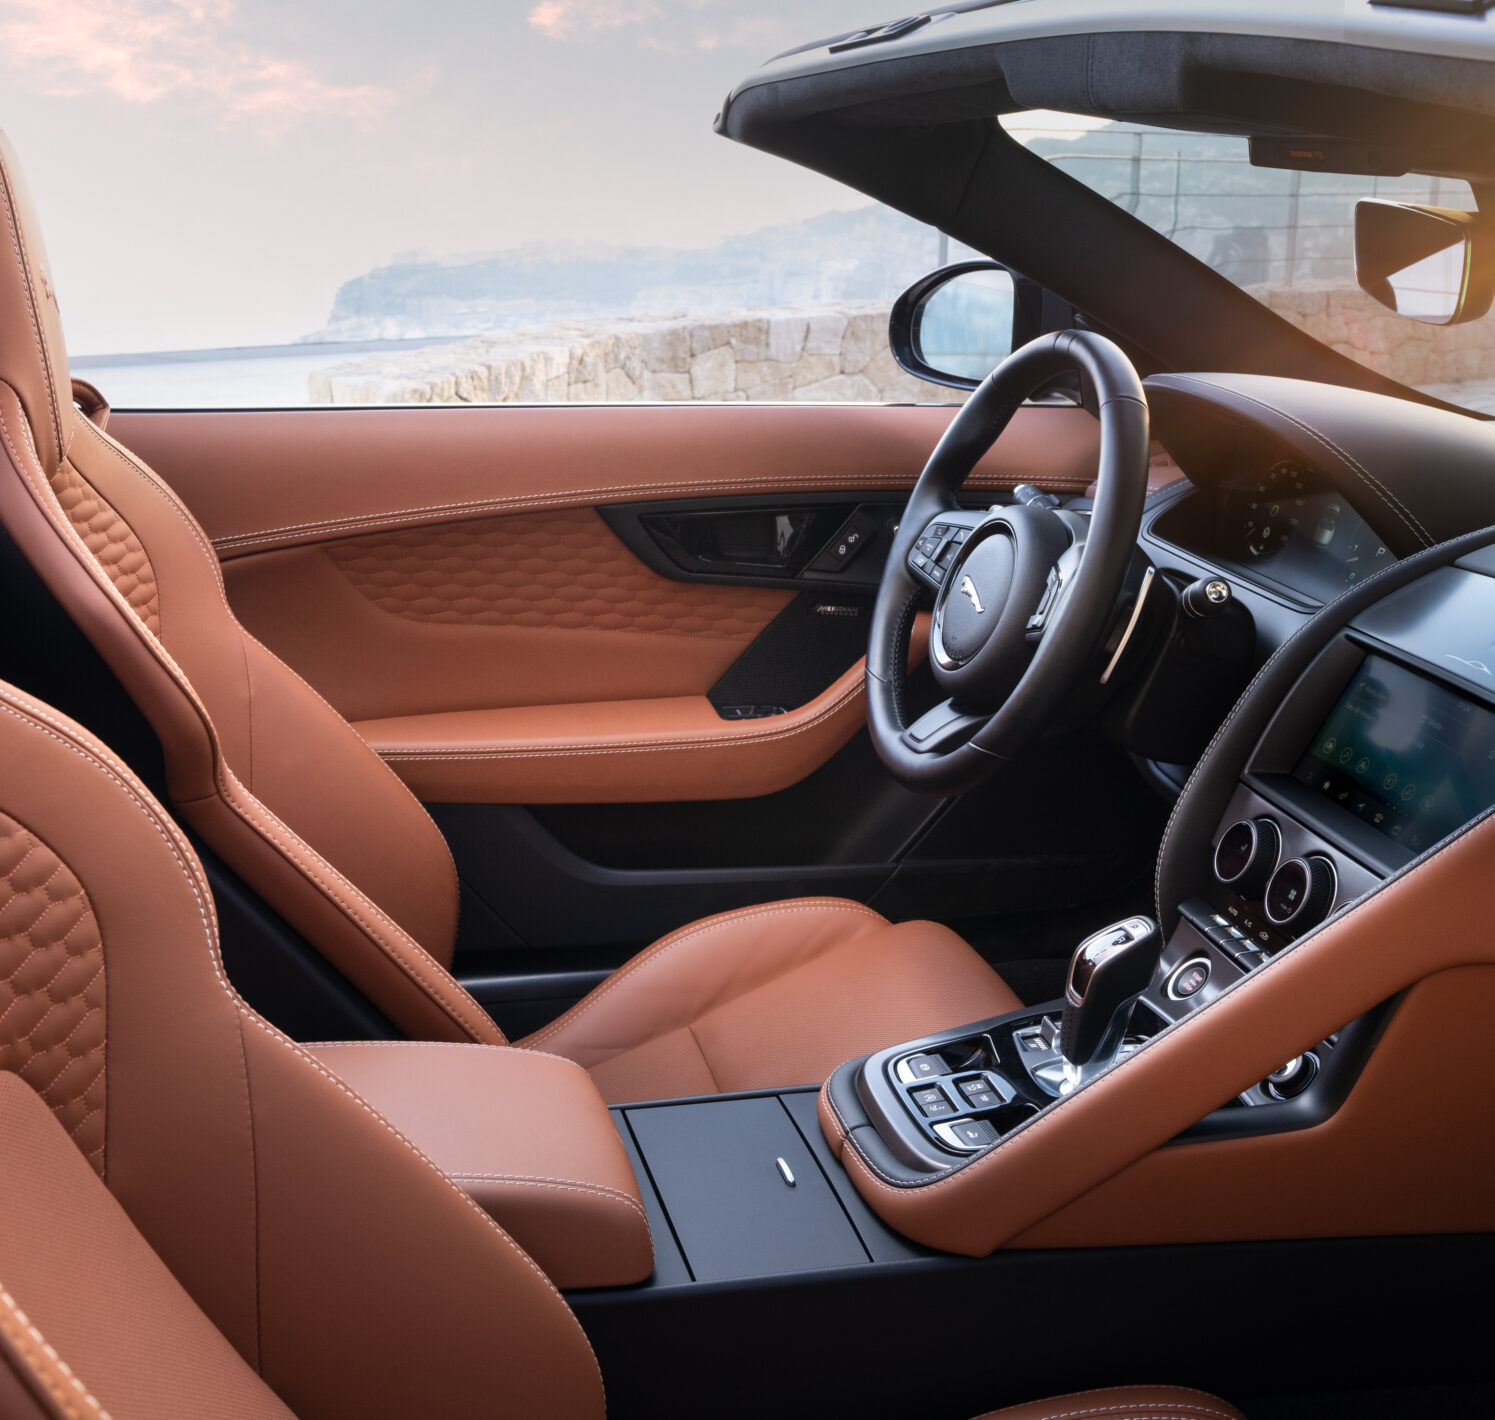 https://autofilter.sk/assets/images/f-type/gallery/Jag_F-TYPE_24MY_Interior_03_March_2023_MF102758.jpg - obrazok